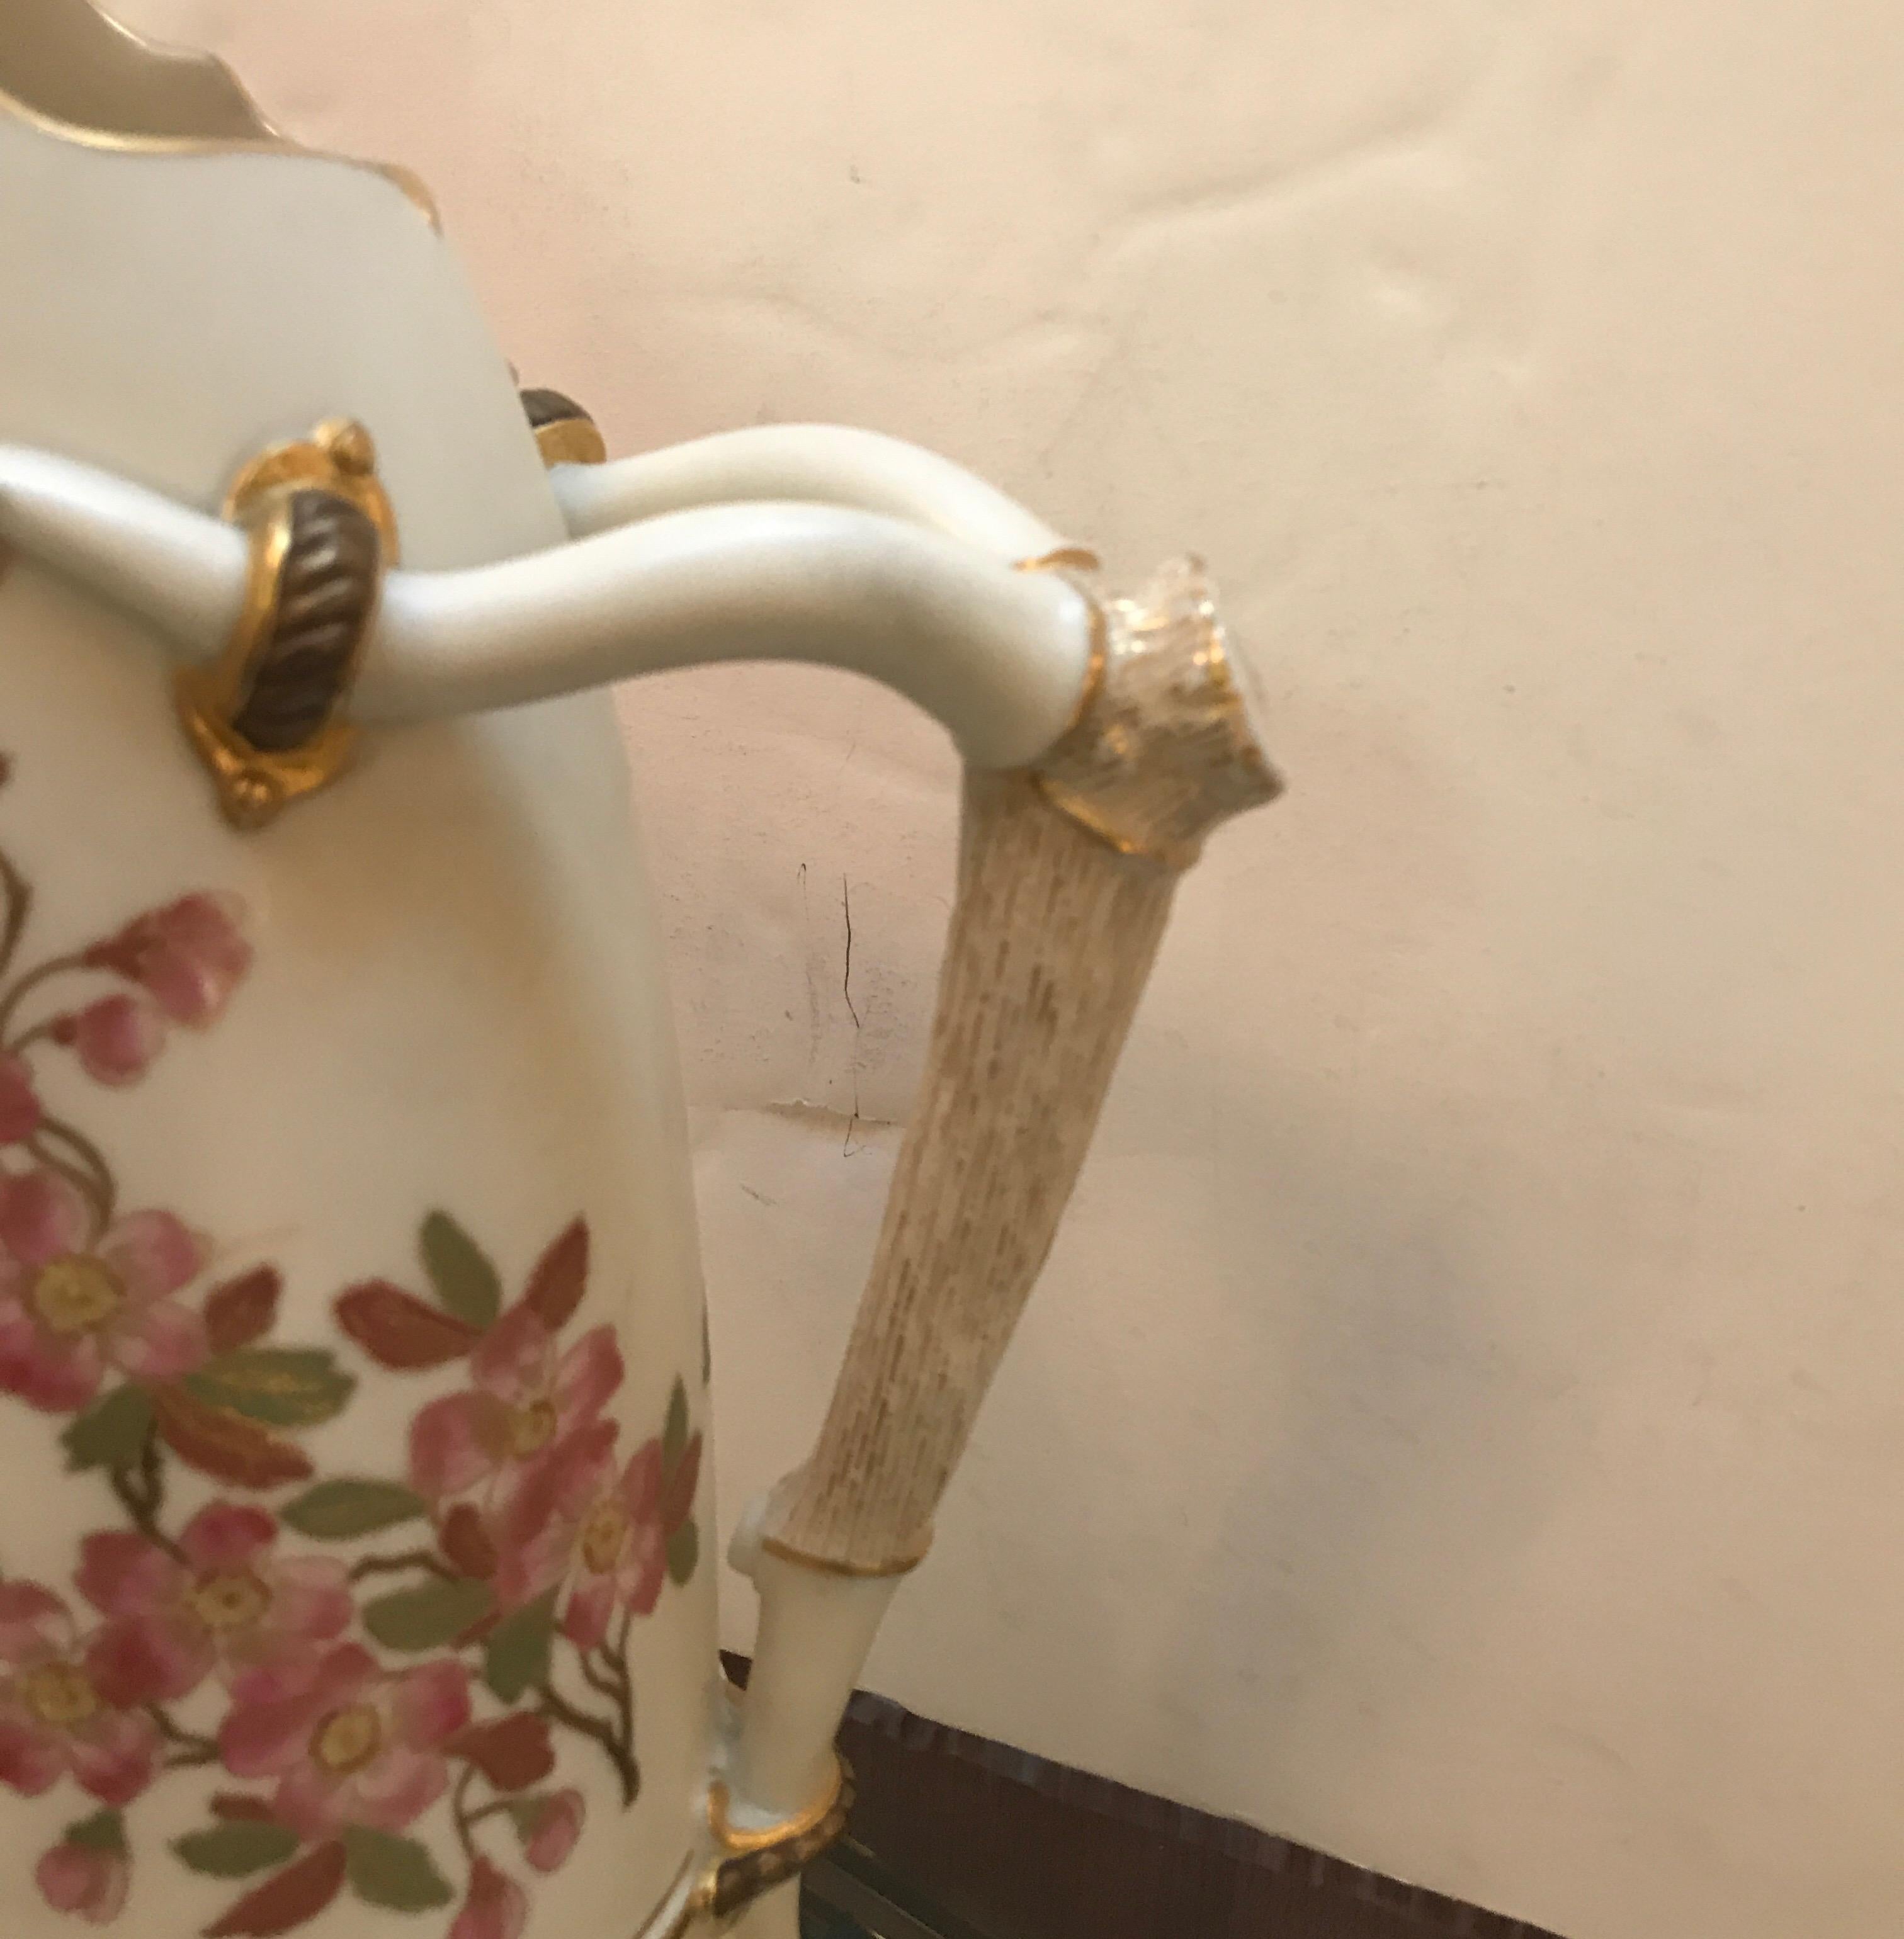 19th century hand painted Royal Worcester stag Horn handled pitcher. The tusk shape with floral decoration all around with a porcelain stag Horn style handle. The edges with original gilt decoration. Marked on the bottom with the Royal Worcester